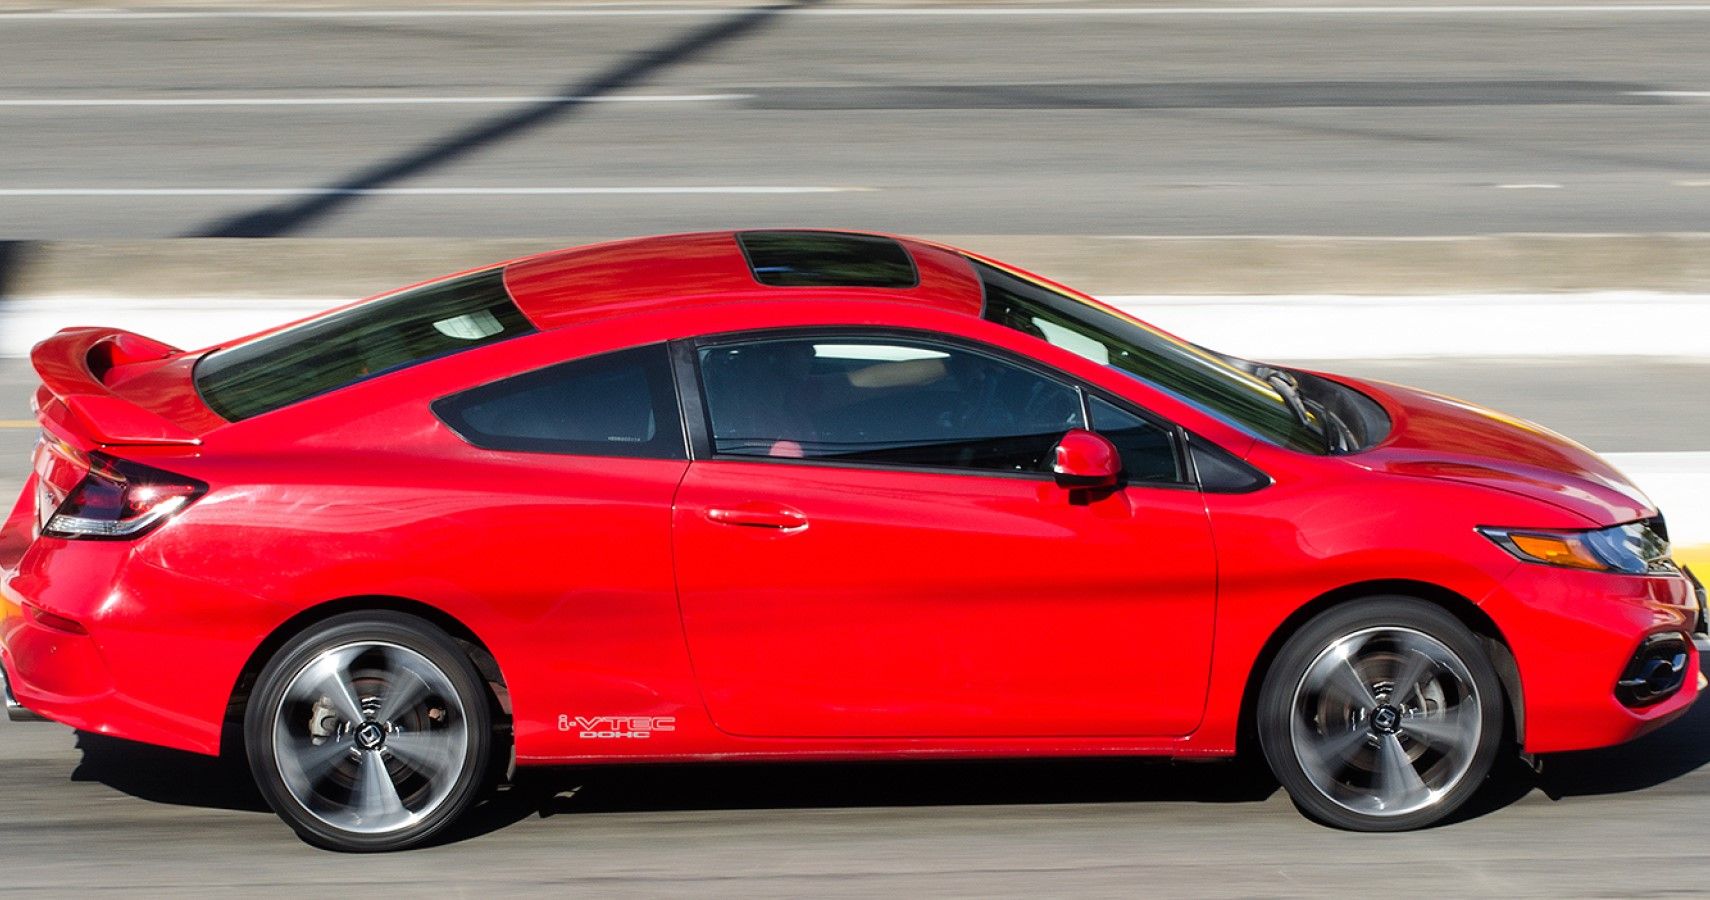 Honda Civic Si on the highway